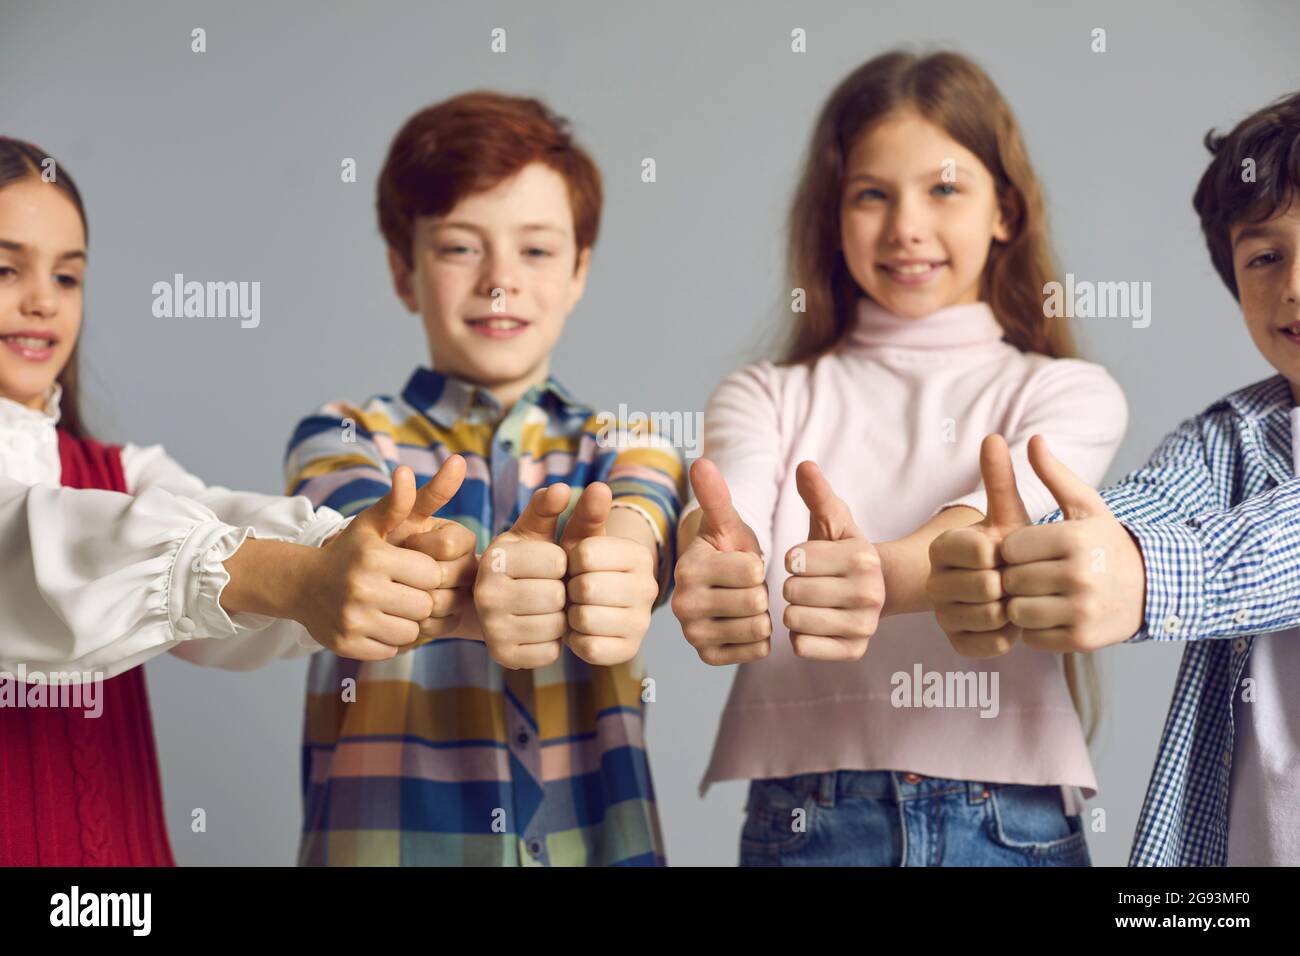 Studio group shot of happy satisfied little children giving thumbs up all together Stock Photo